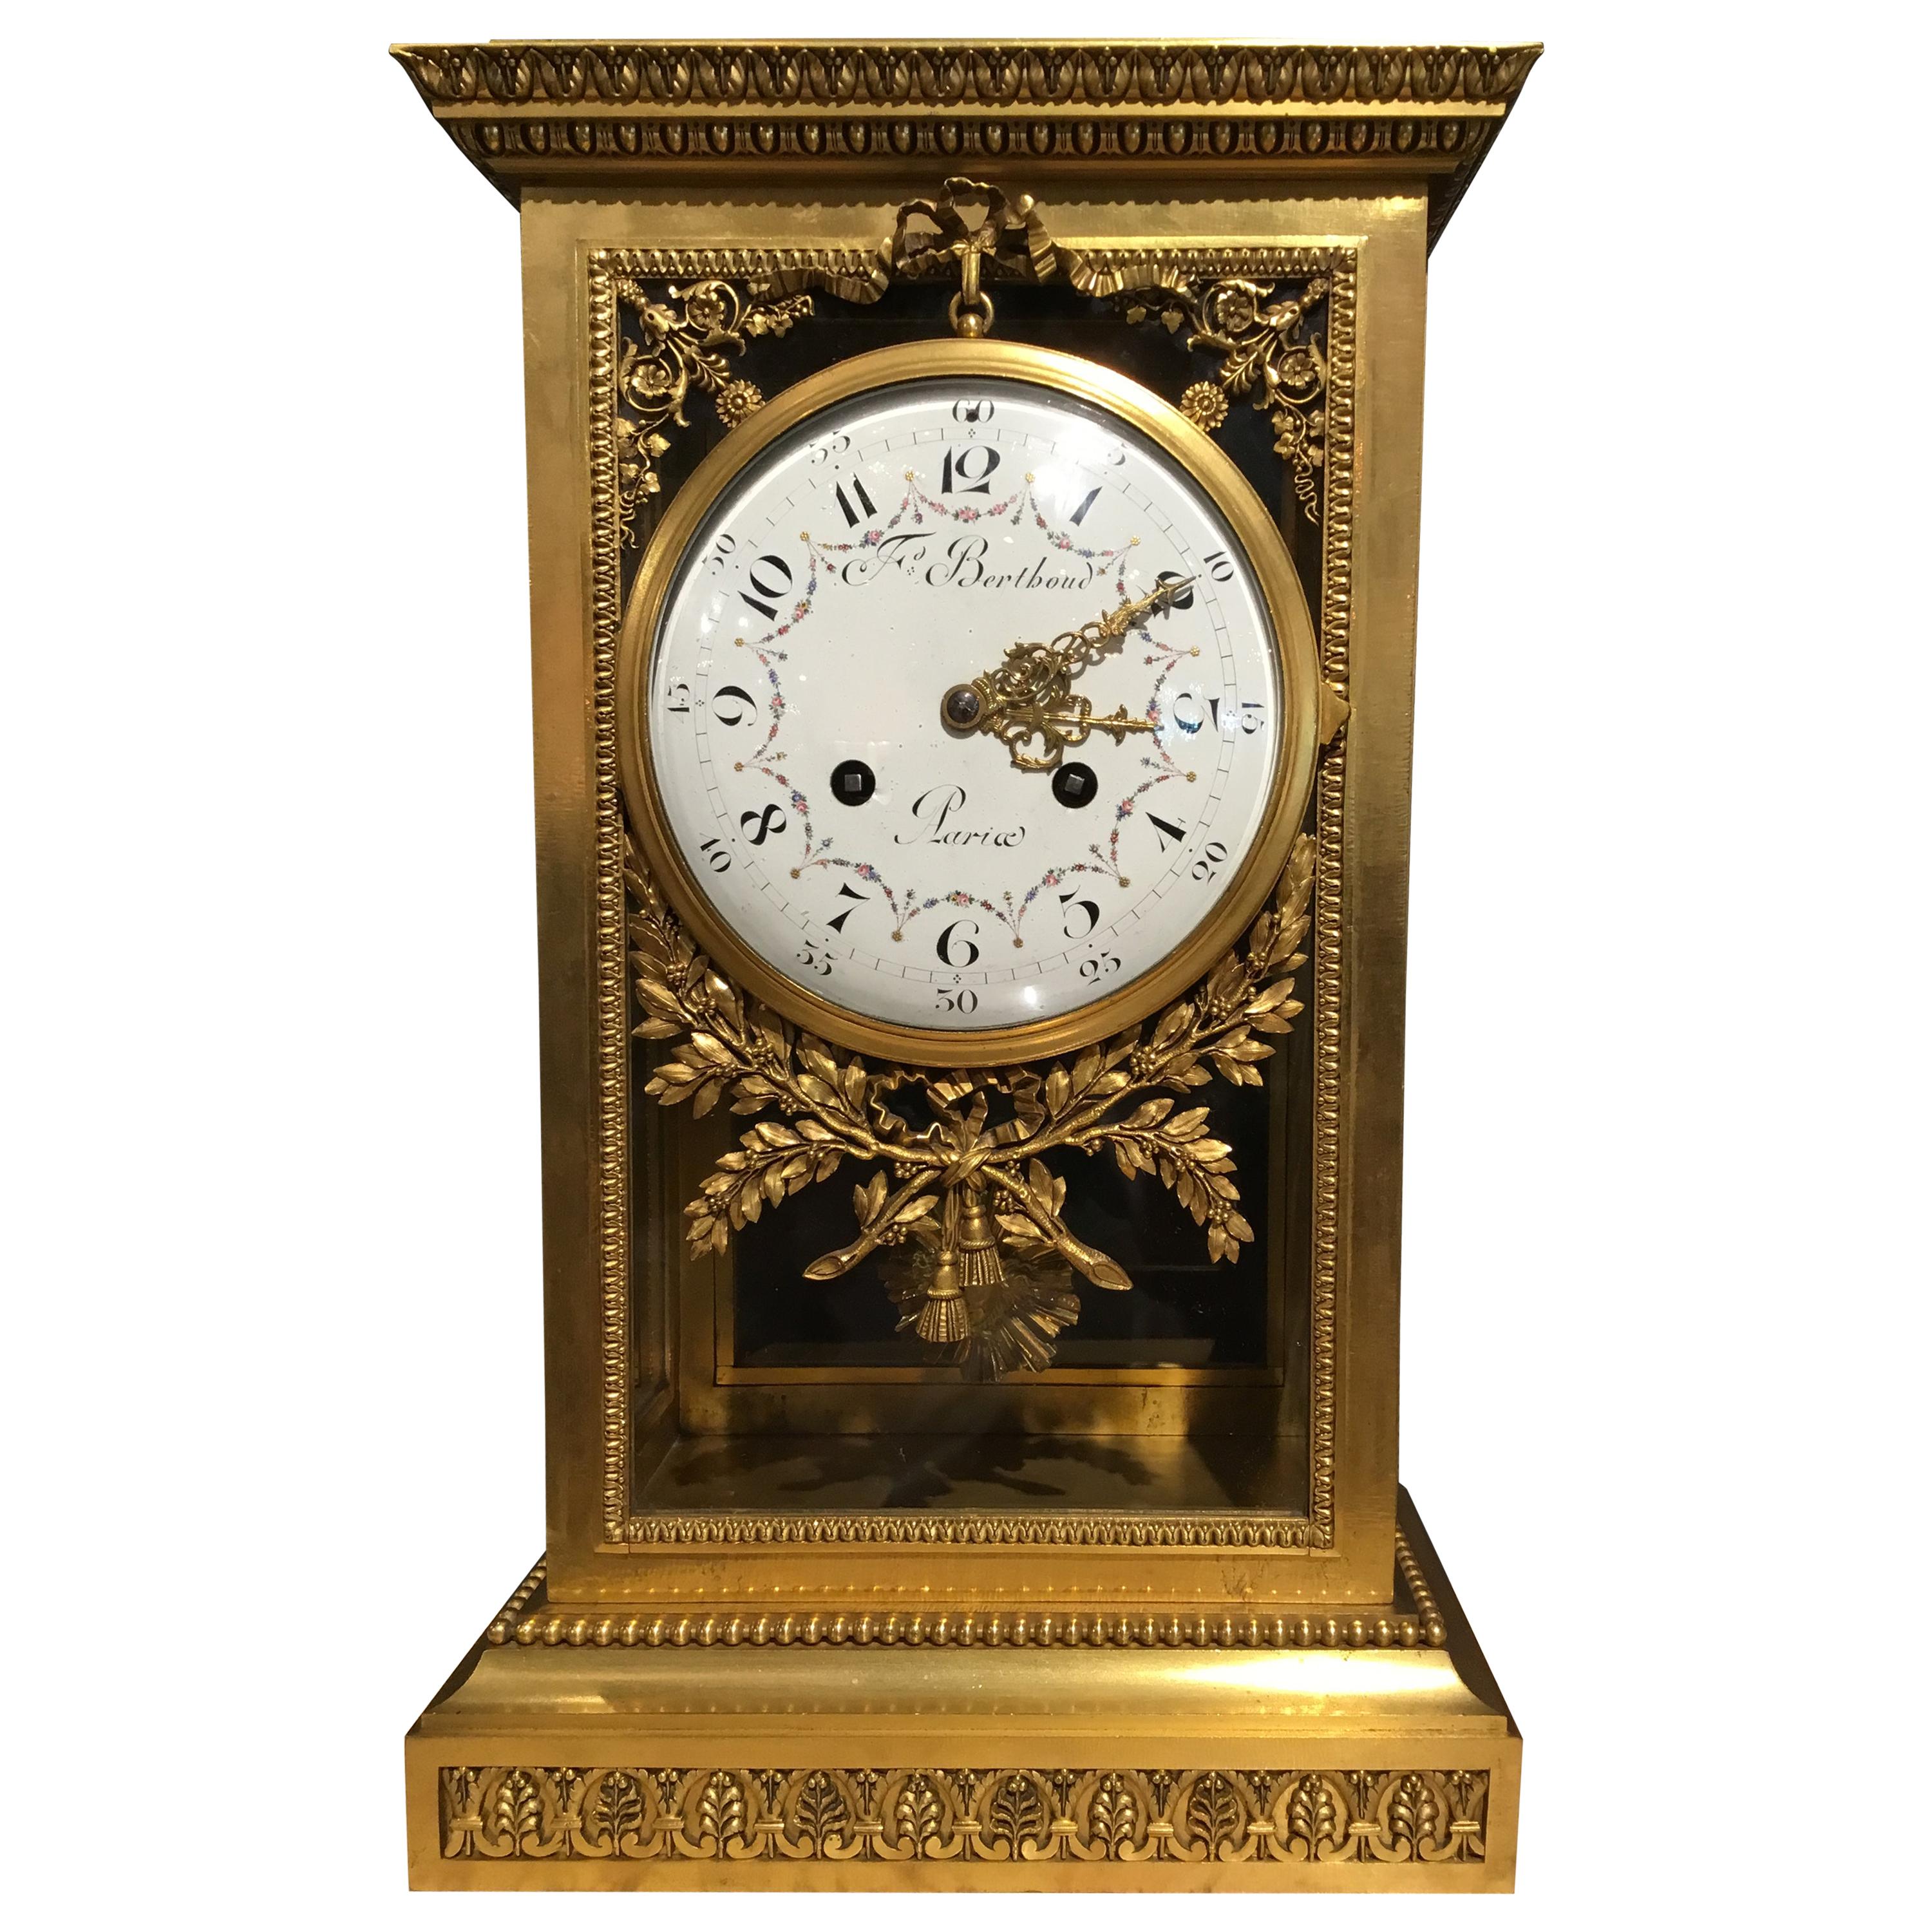 Bronze Dore Mantel Clock, 19th Century by F. Berthoud with Open Escapement